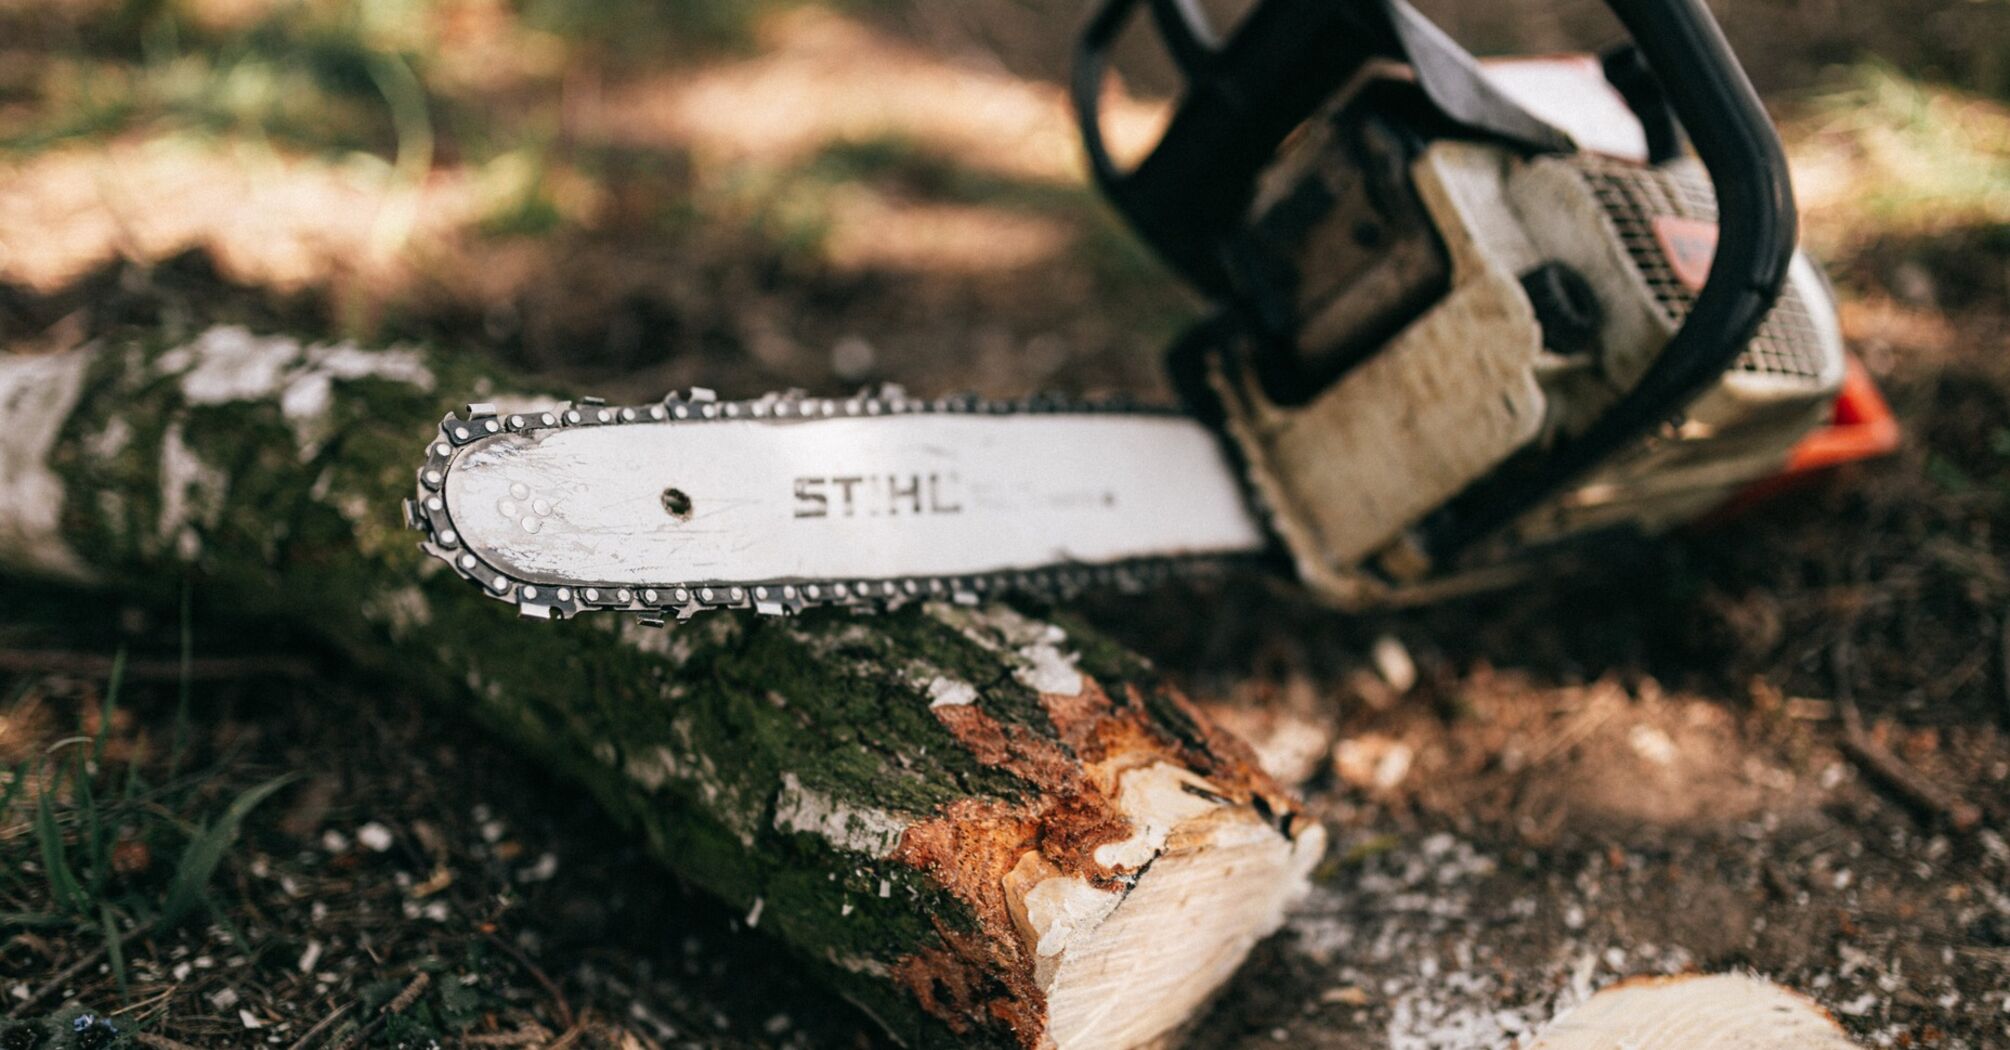 We study the differences between electric saws and chainsaws